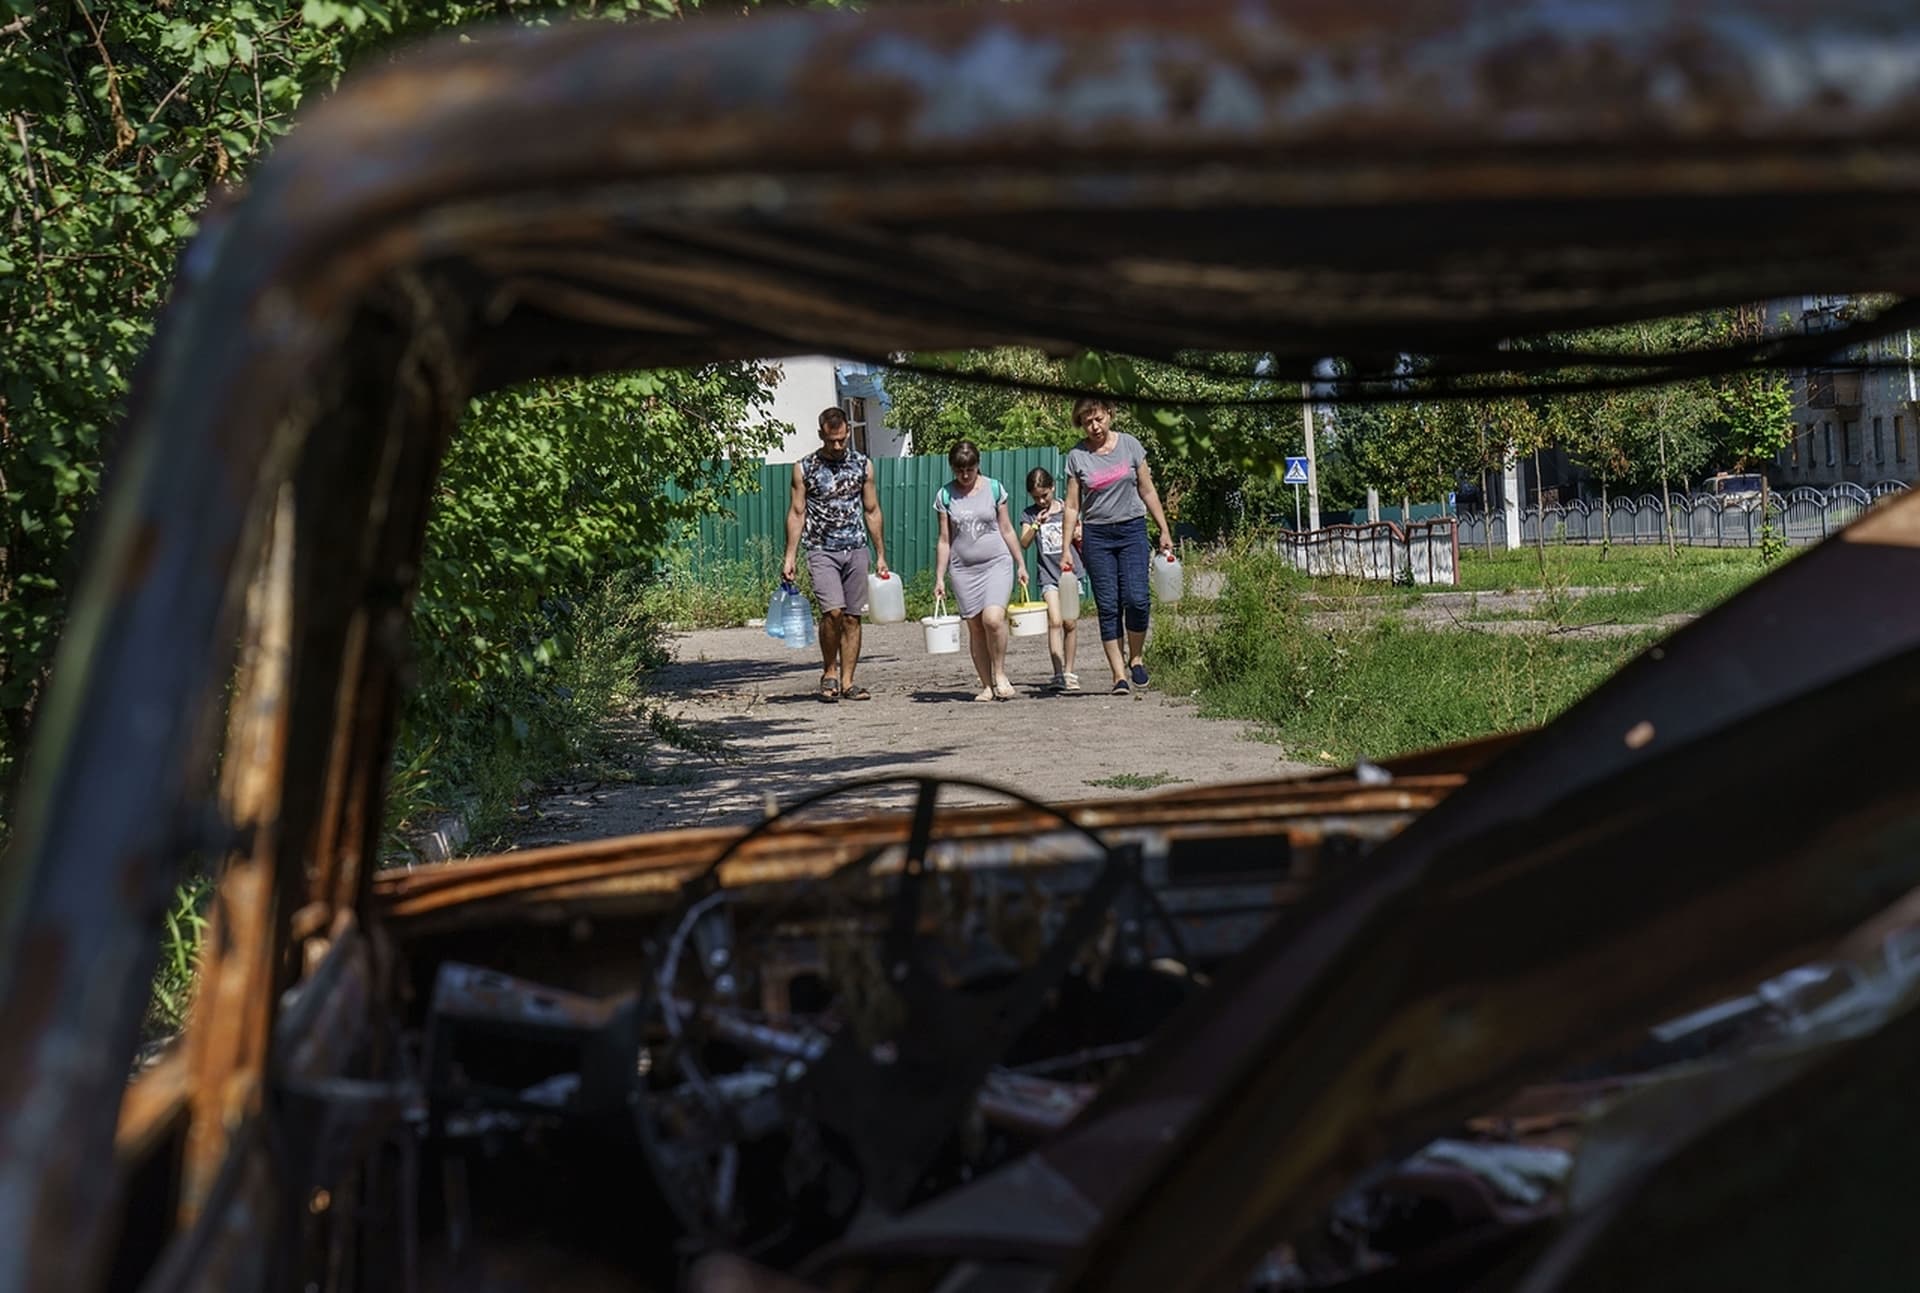 Residents carry water collected at a nearby well while walking past the charred remains of a car from a May rocket attack in Sloviansk